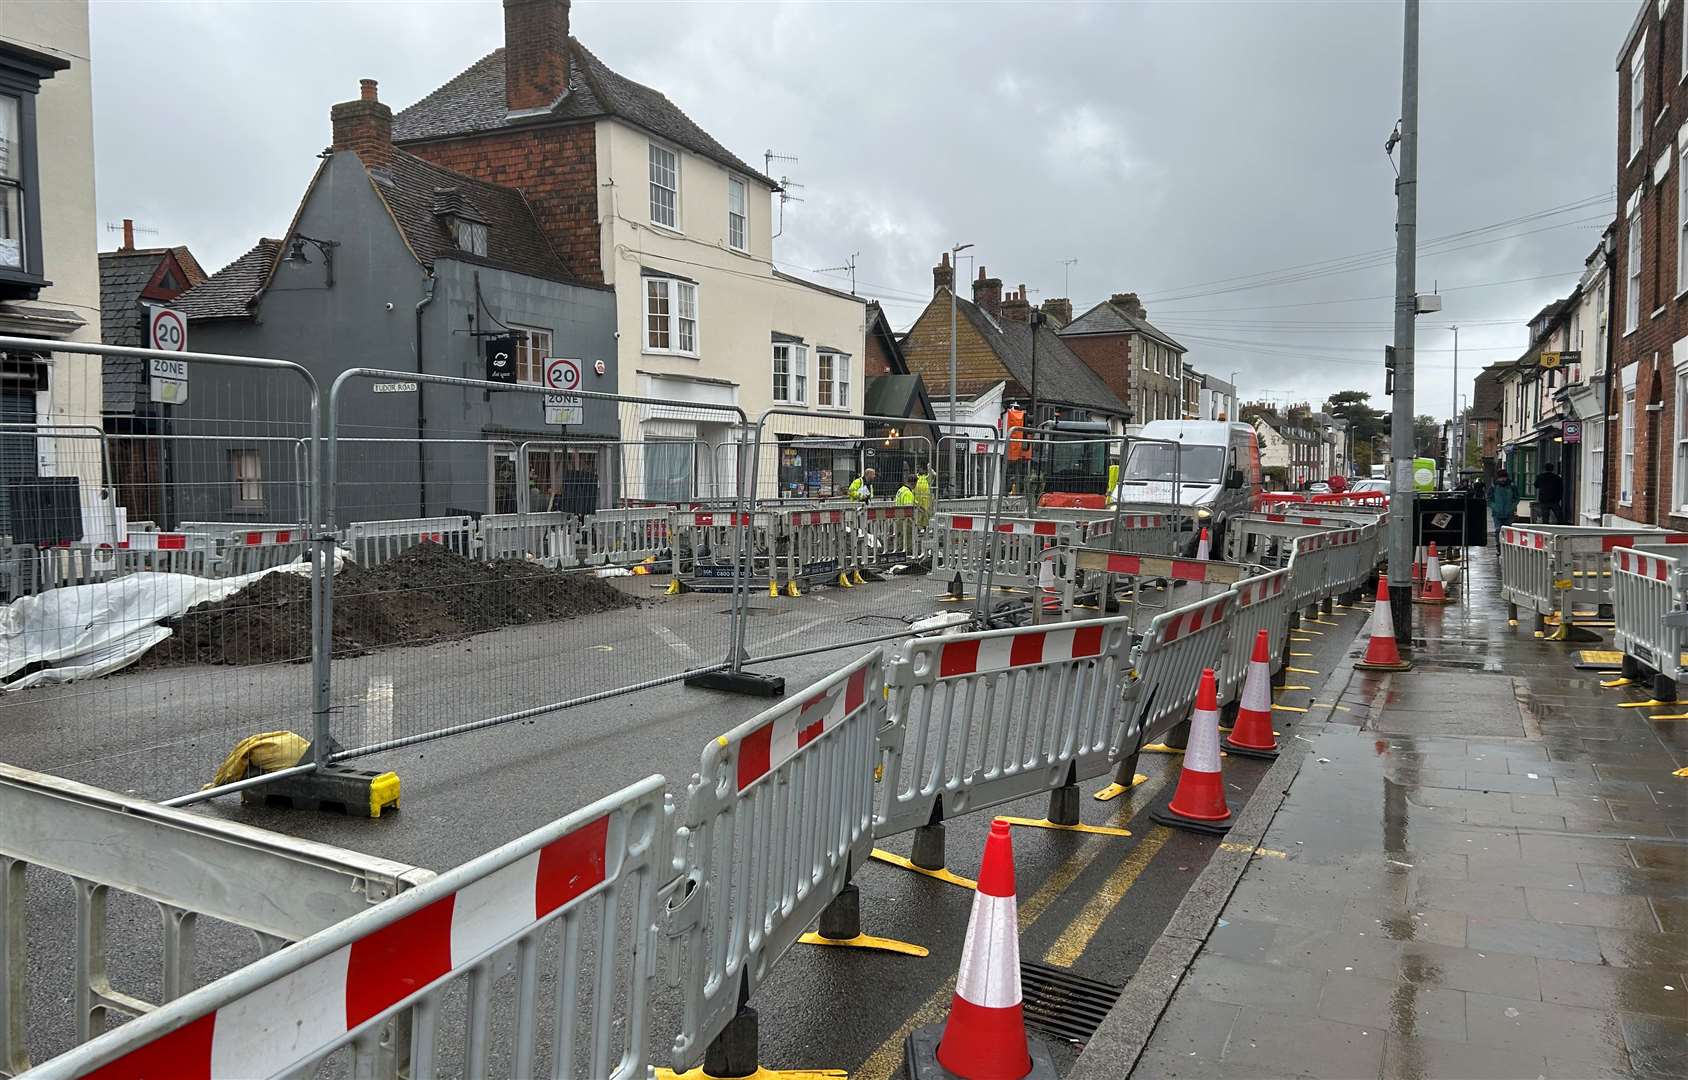 Wincheap in Canterbury was closed last week for emergency gas works